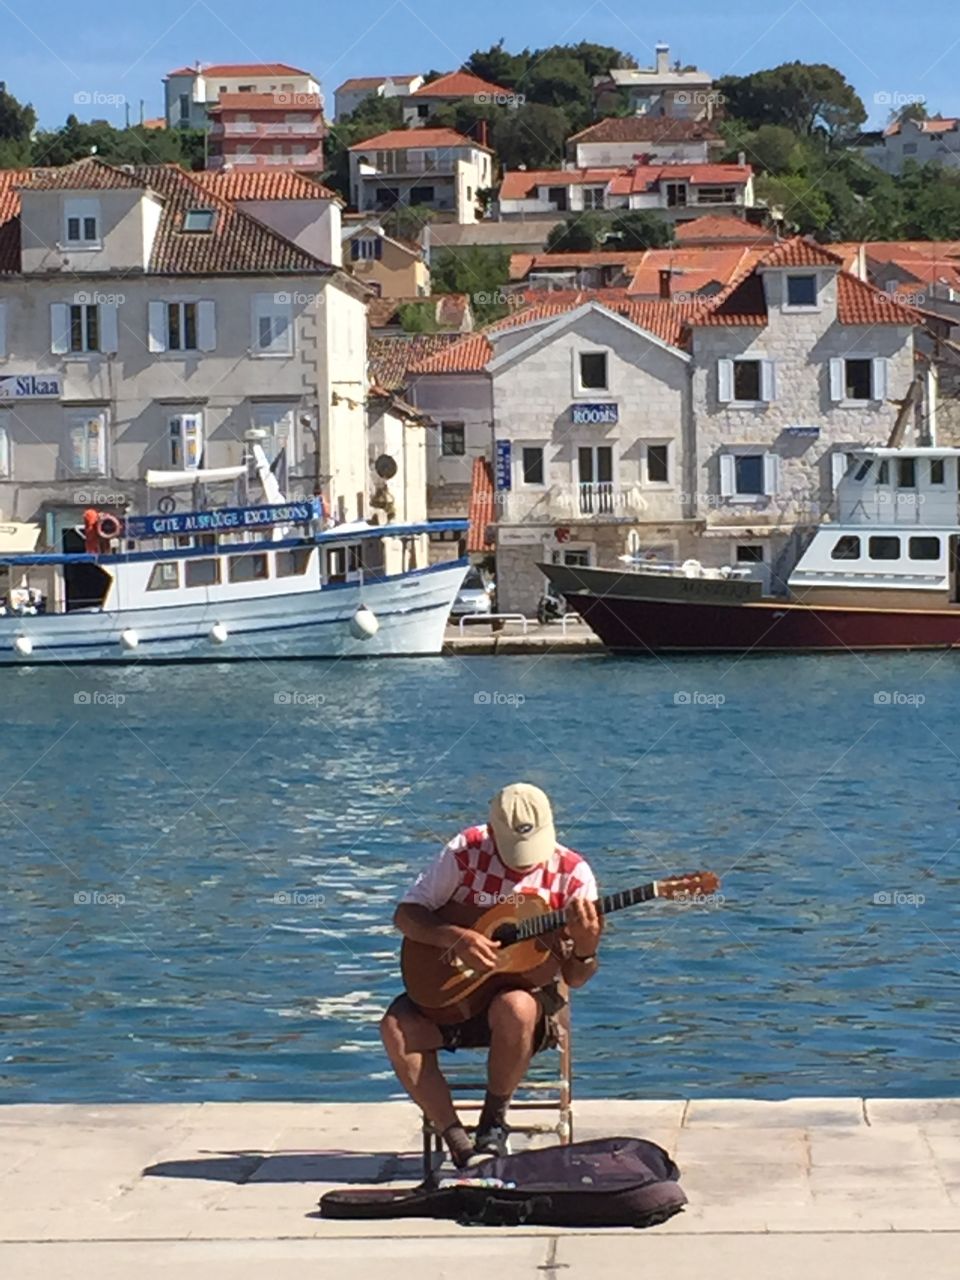 Sights and sounds. Sights and sounds of the ancient Croatian town of Trogir